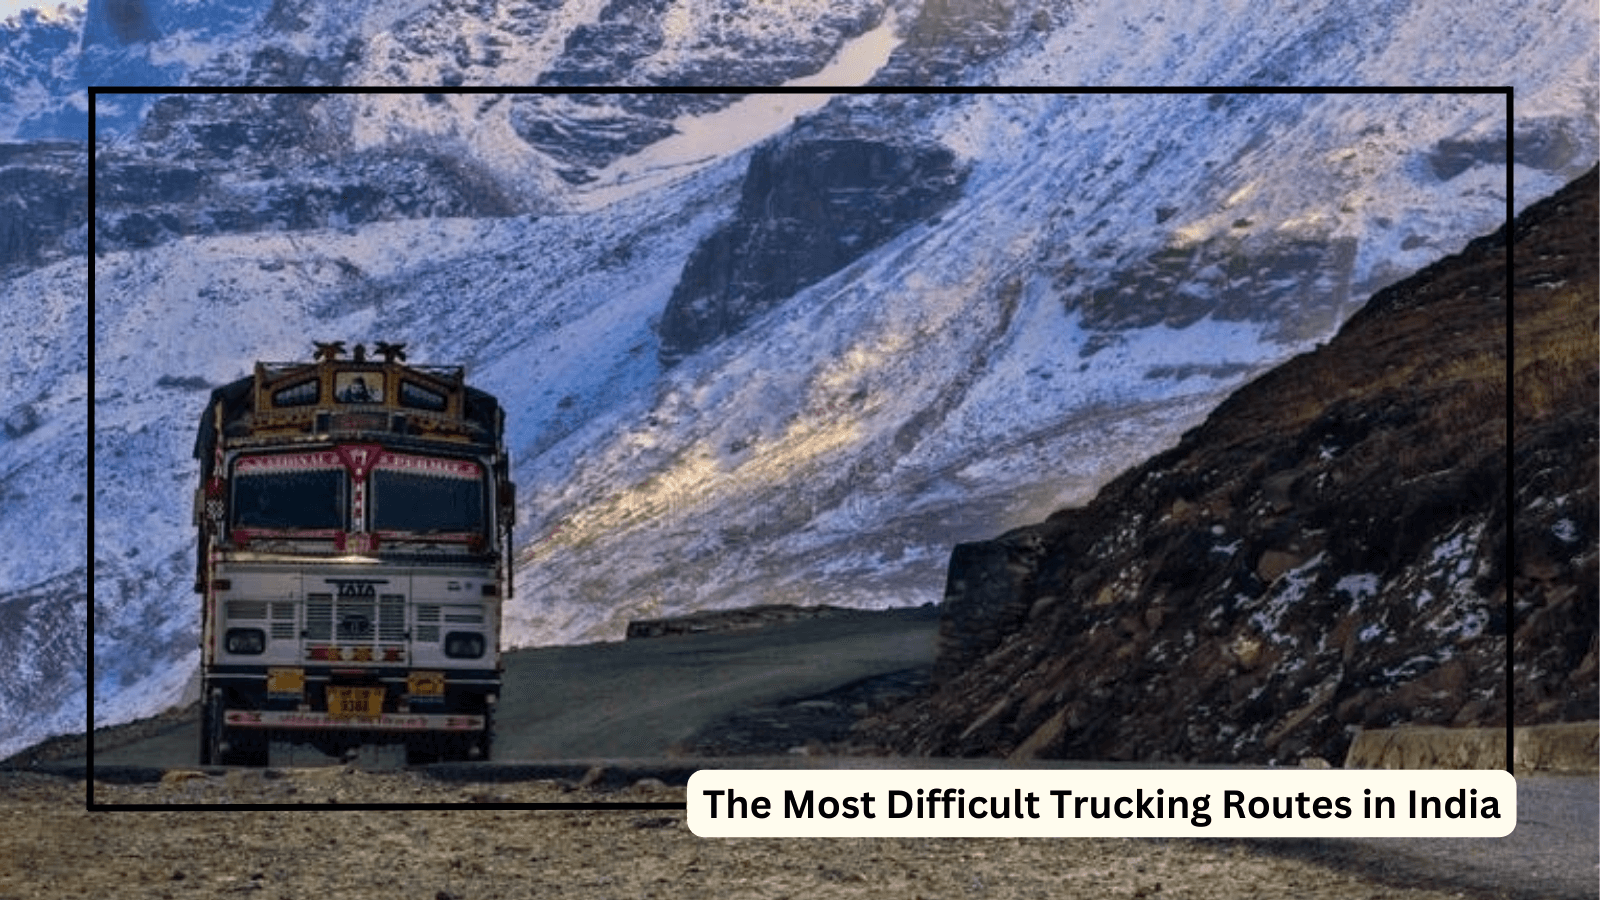 Top 10 Dangerous Roads in India for Trucking